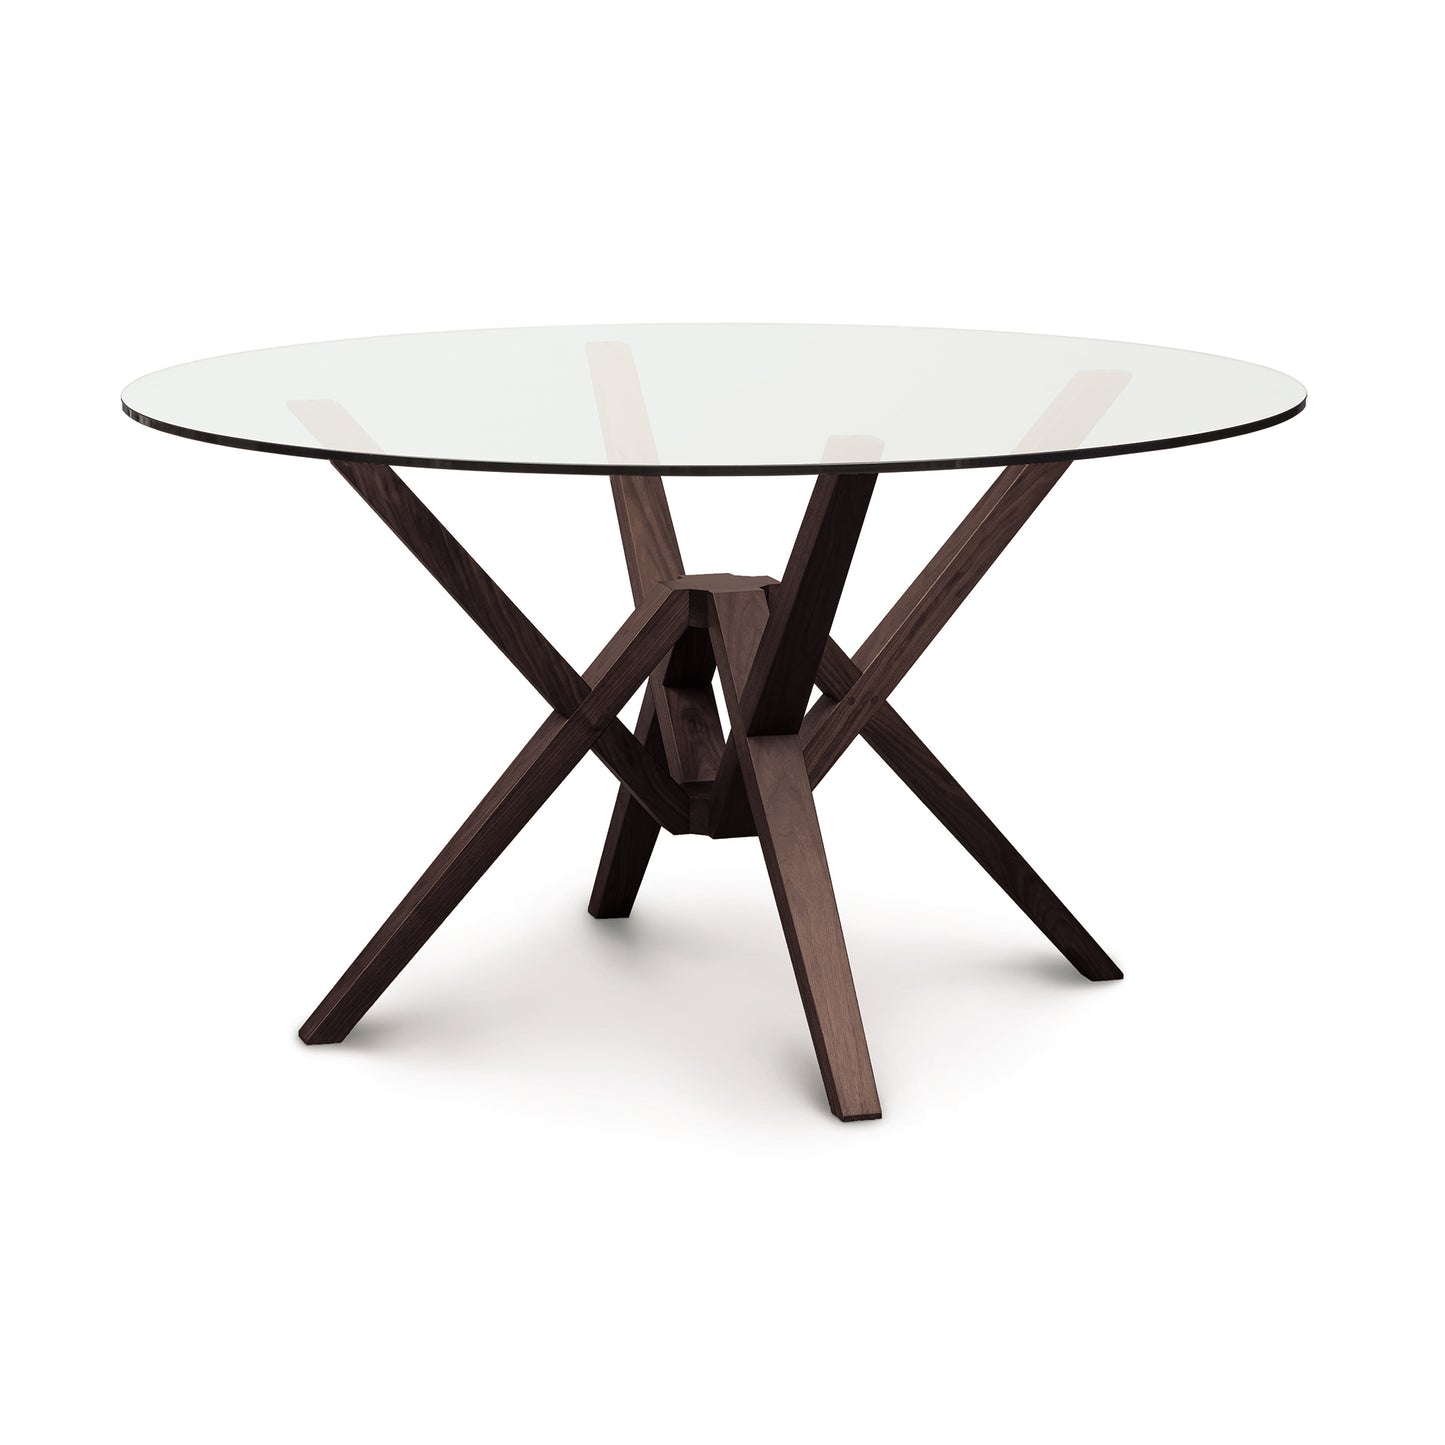 An Copeland Furniture Exeter Round Glass Top Table with a sustainably harvested hardwoods base on a white background.